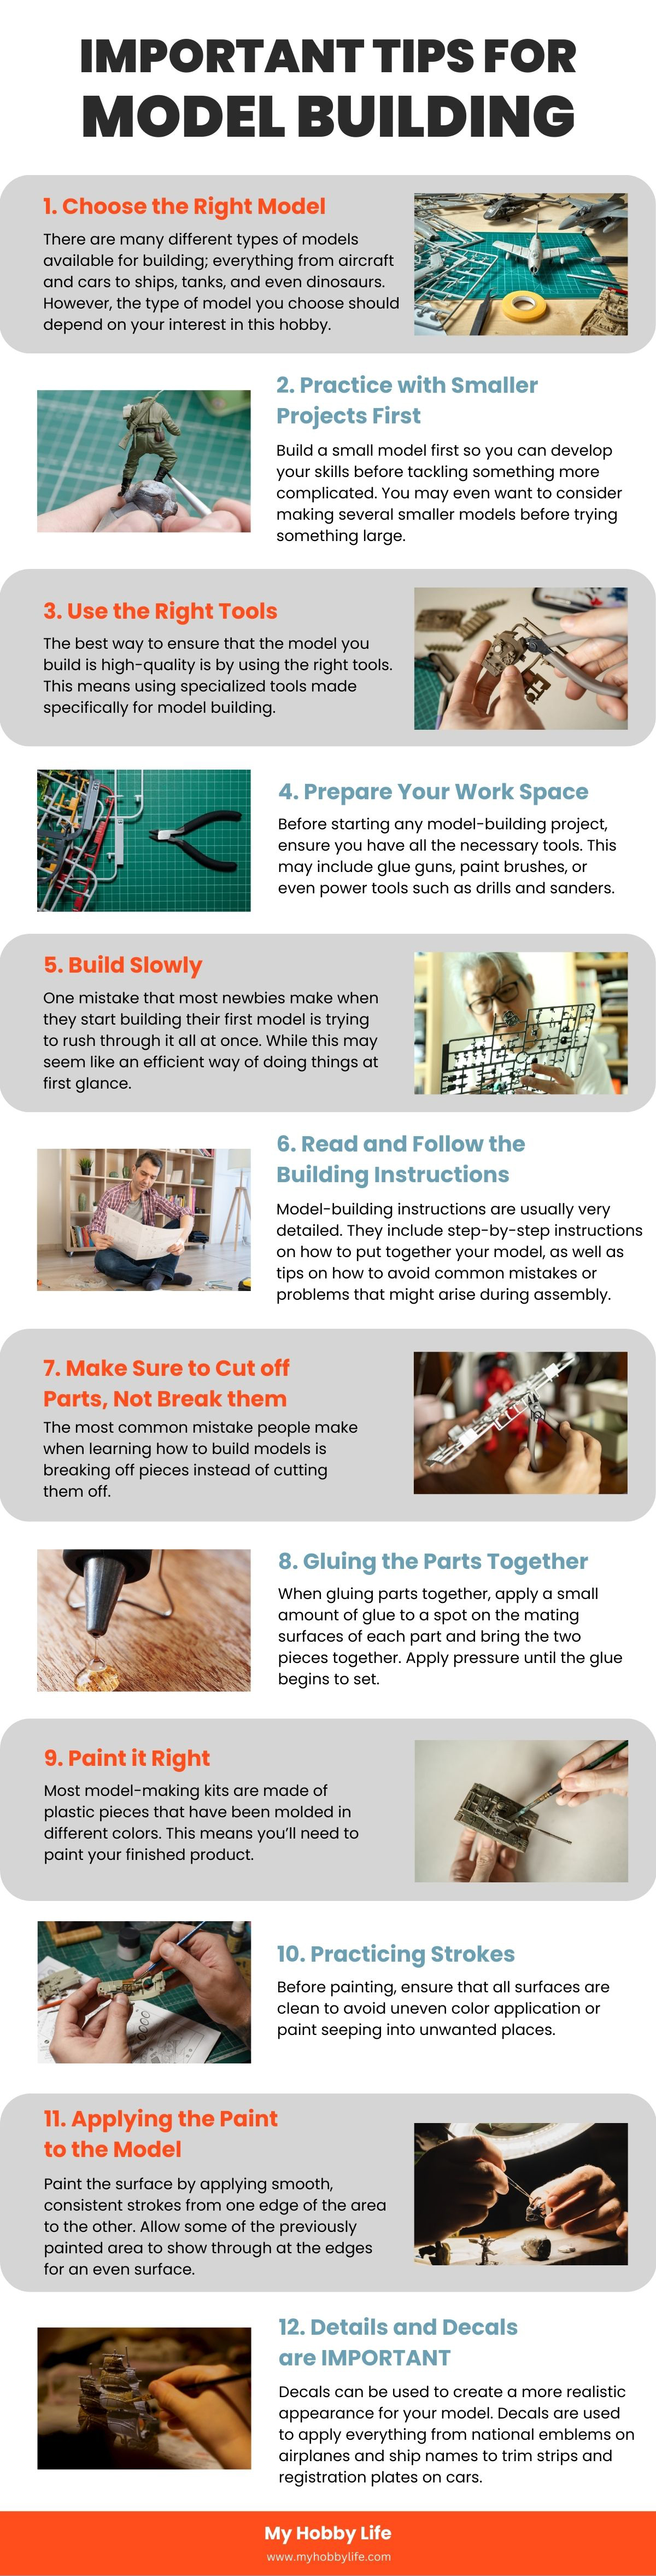 Important Tips for Model Building